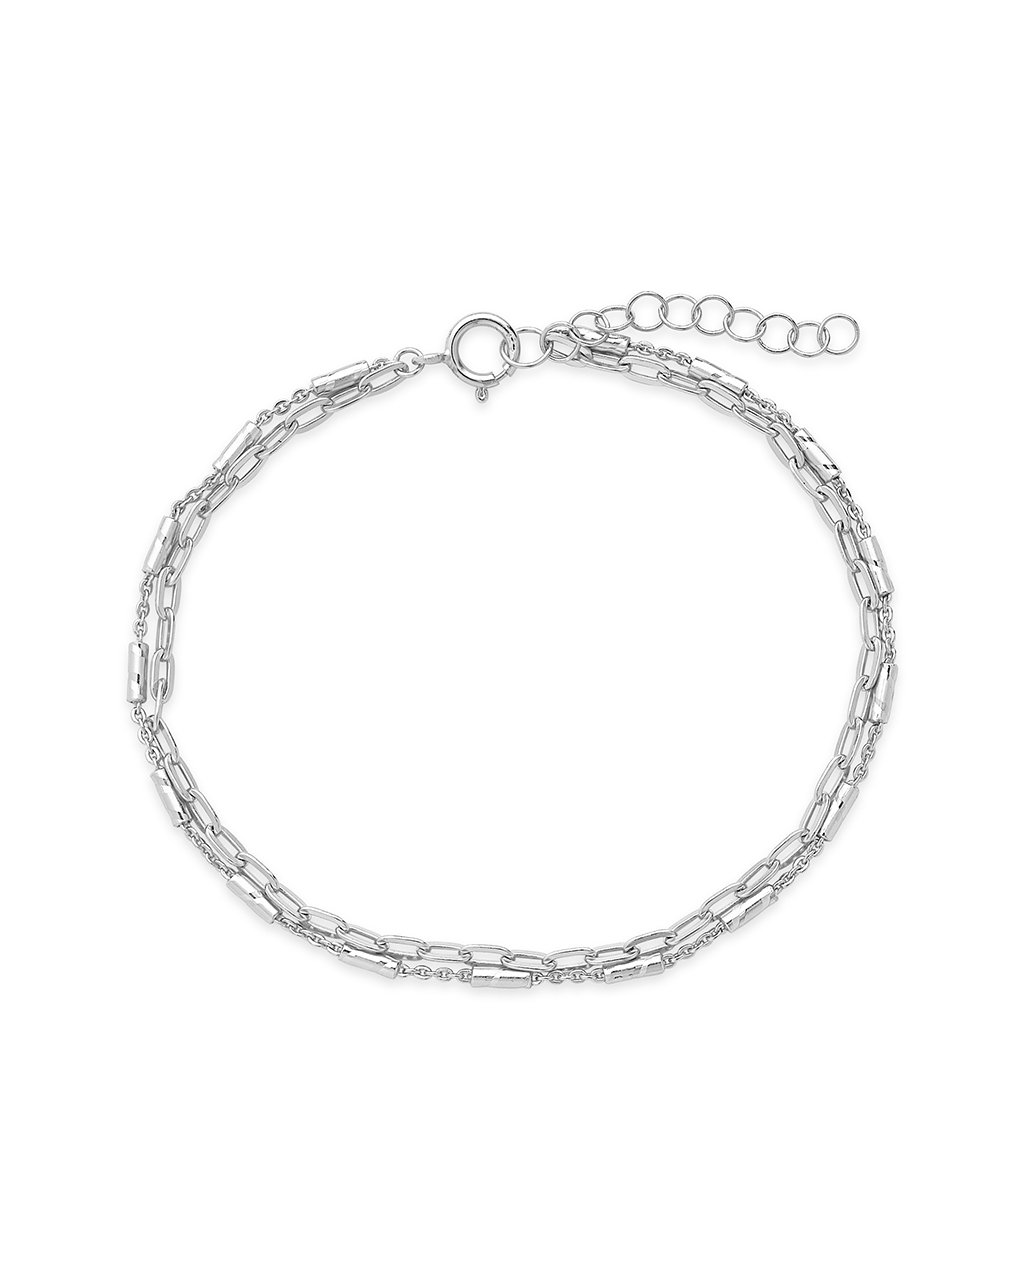 Sterling Silver Delicate 2 Layer Chain Bracelet Bracelet Sterling Forever Silver 